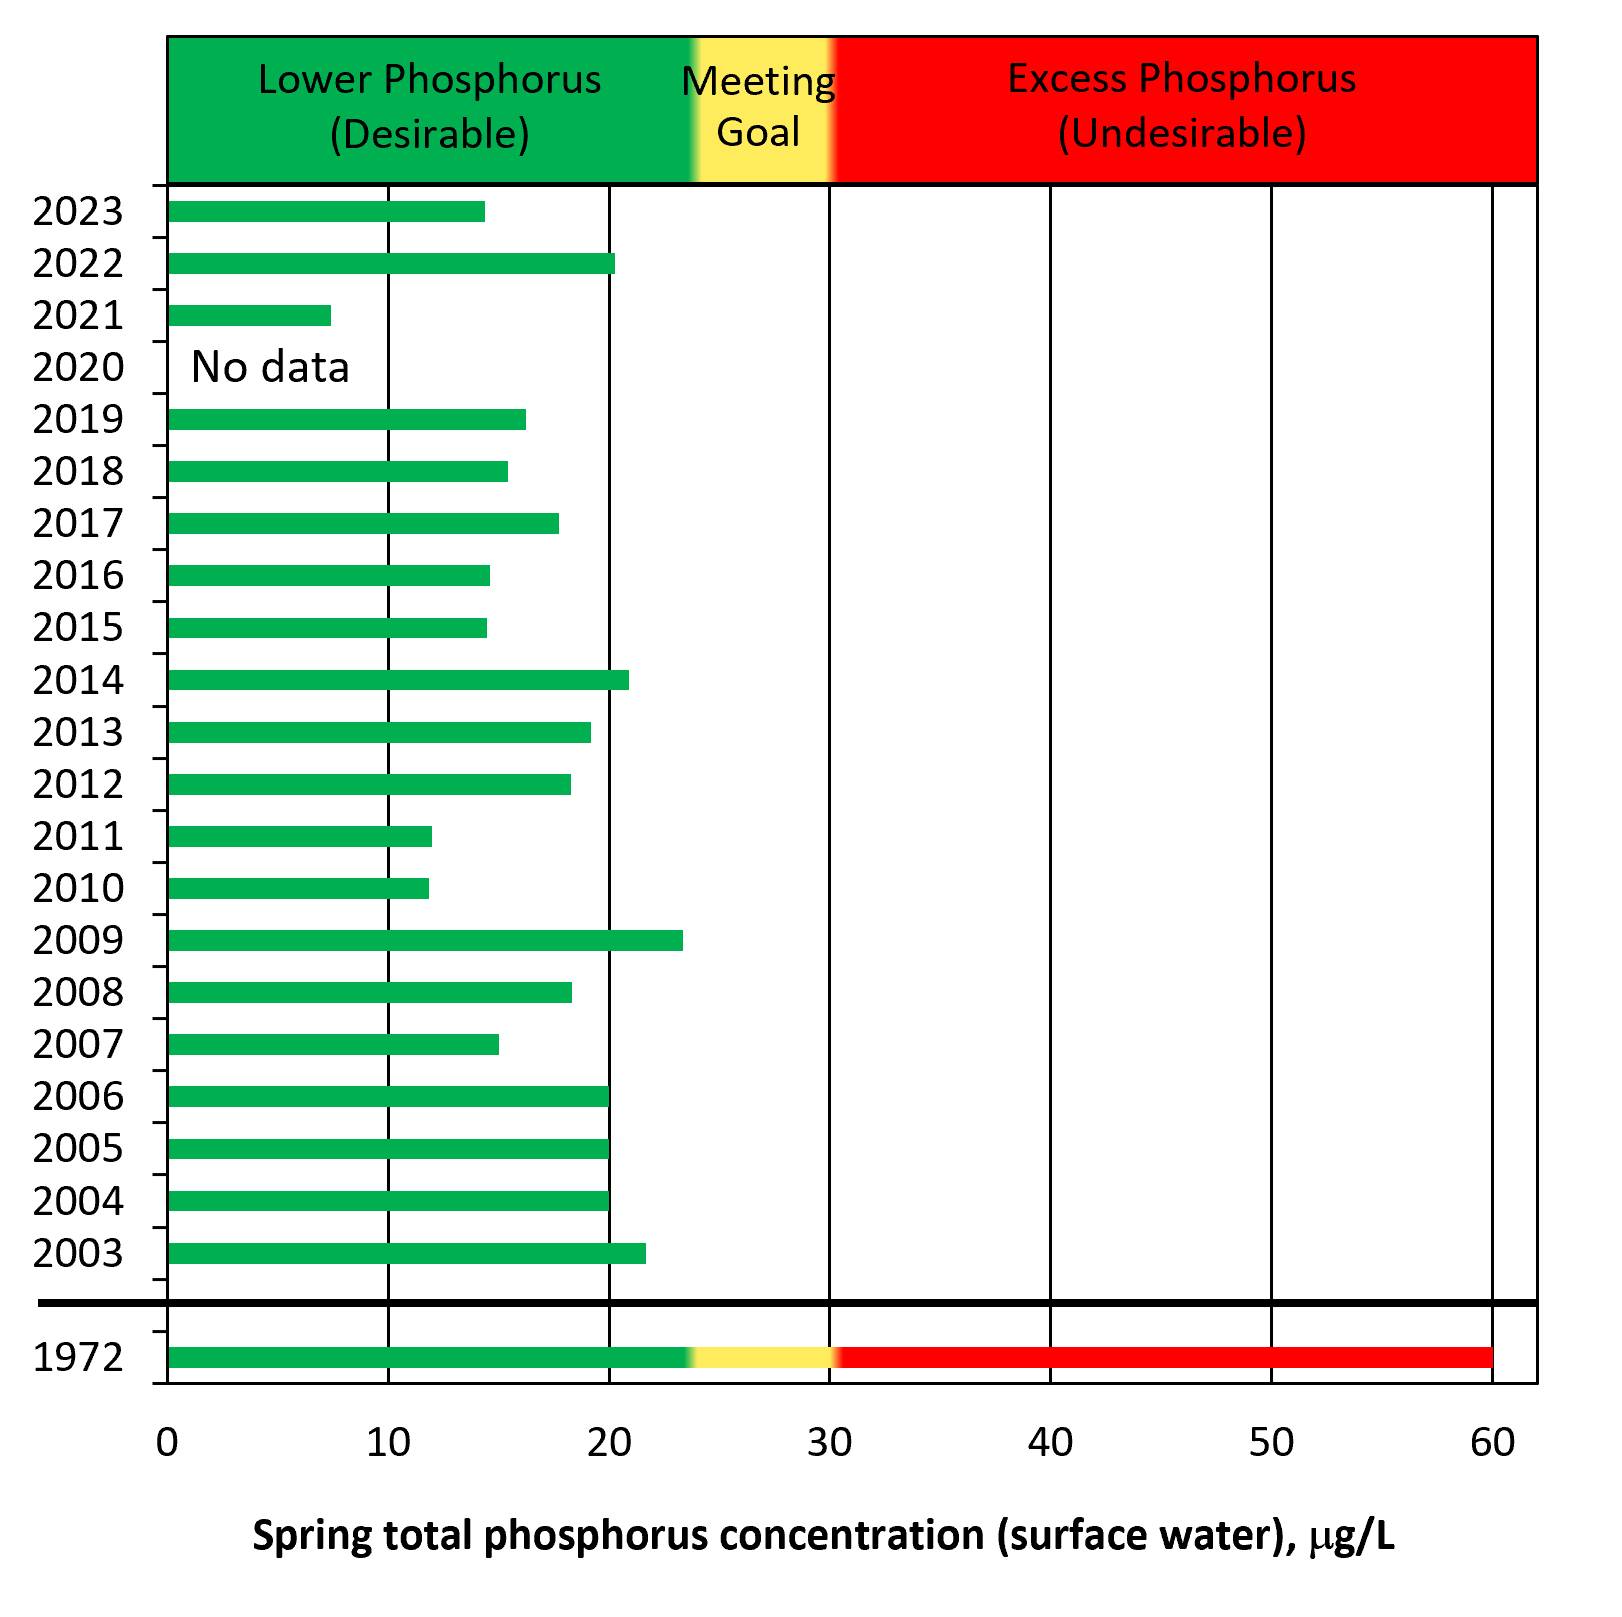 All 2003-present sampling Spring means are all desirable and very low compared to historic 1972 data.